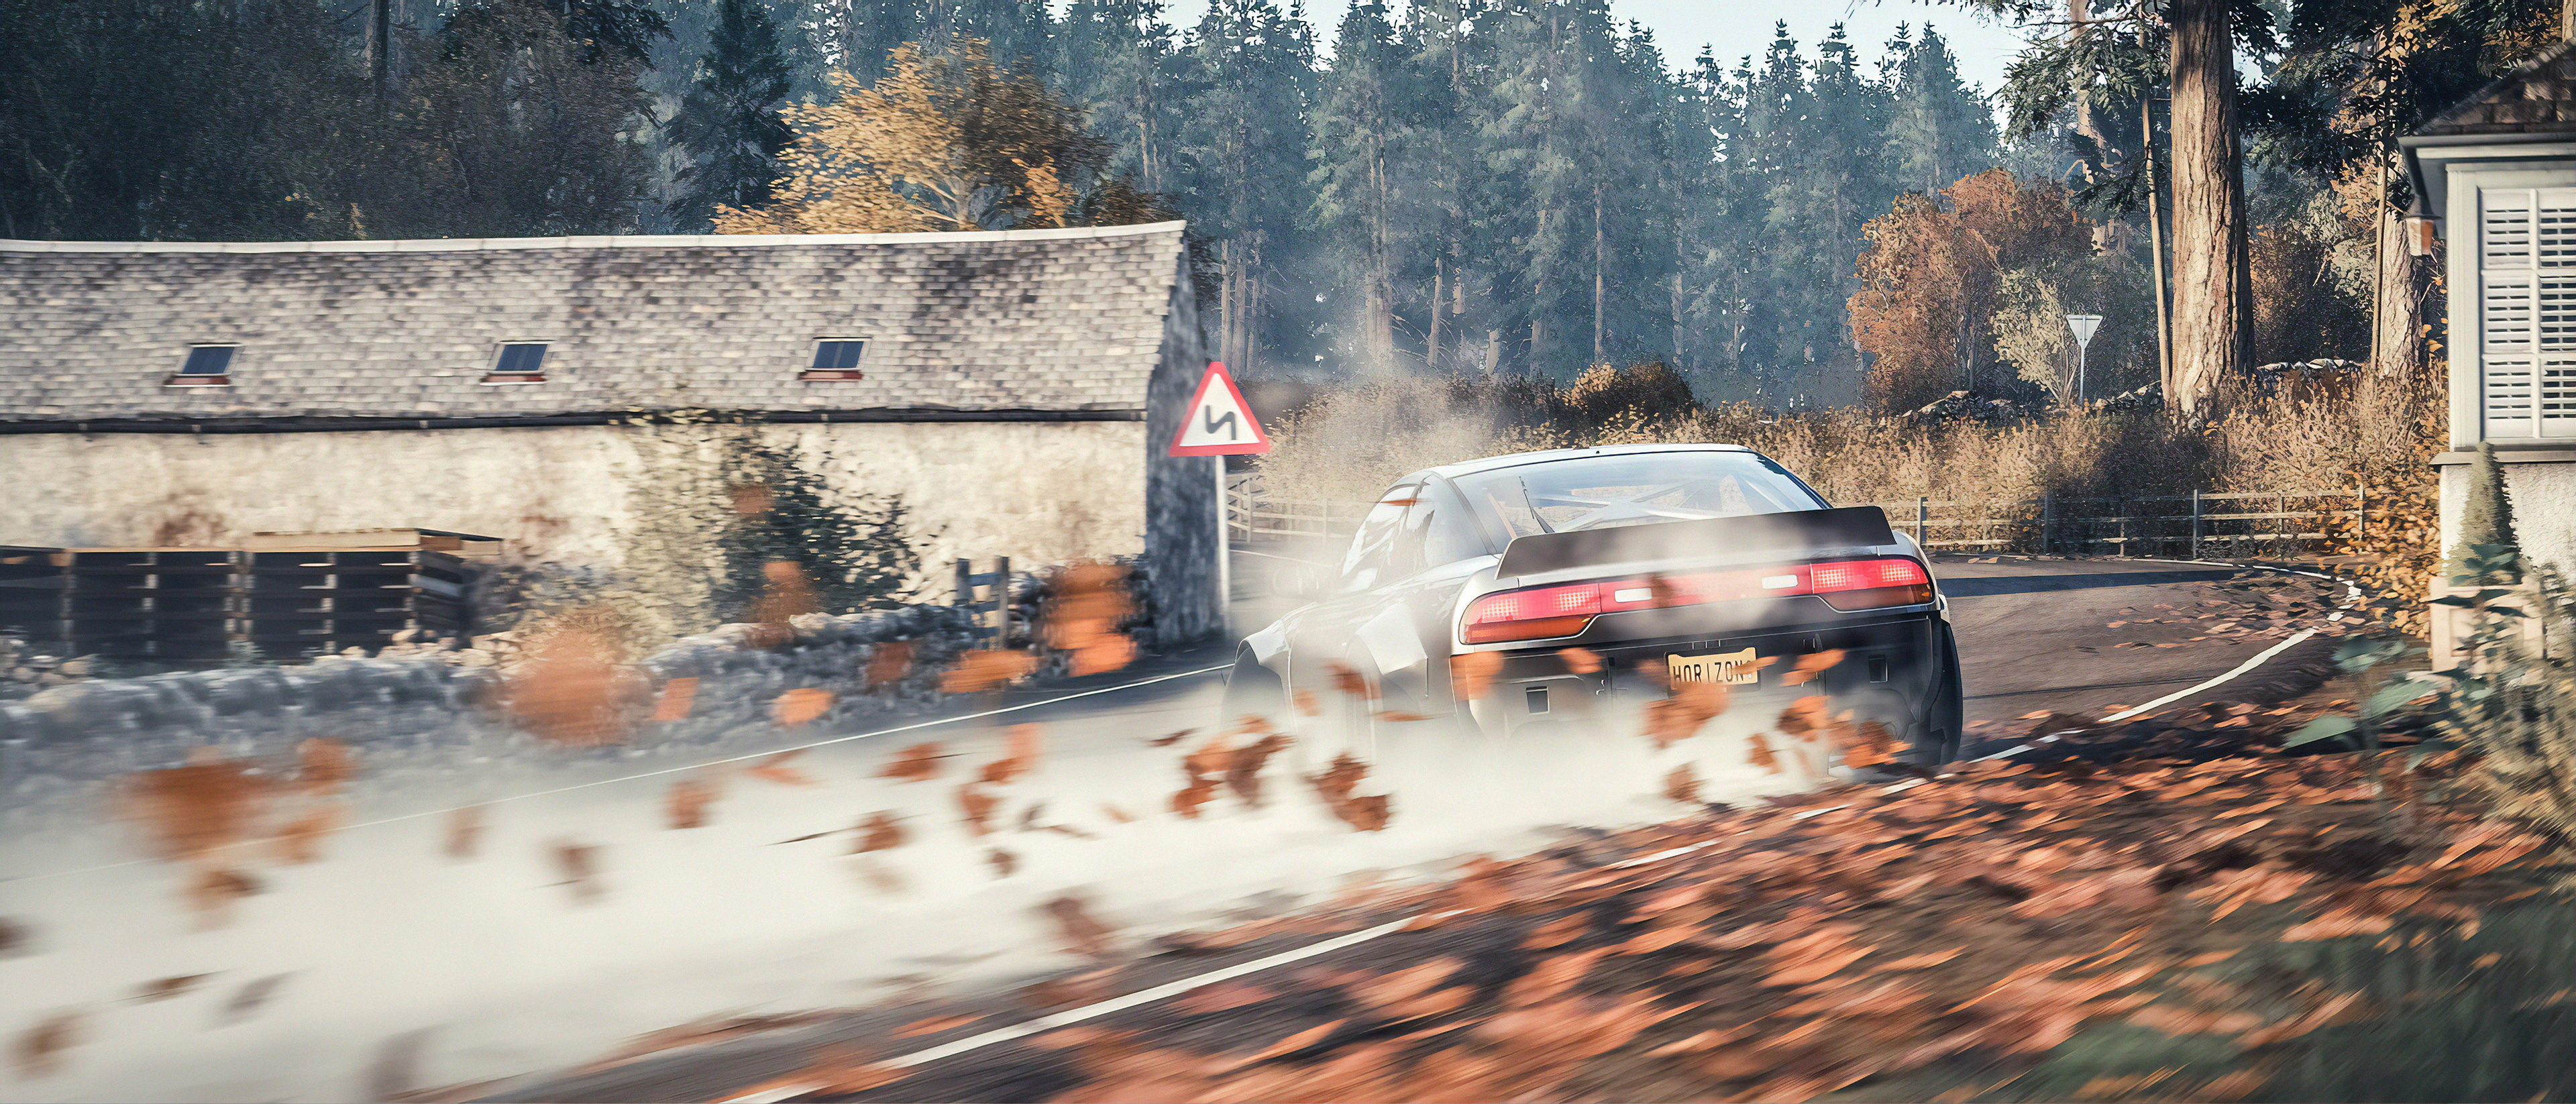 Drifting: Dodge Charger, Forza Horizon 4, Racing video game developed by Playground Studios. 3840x1650 Dual Screen Background.